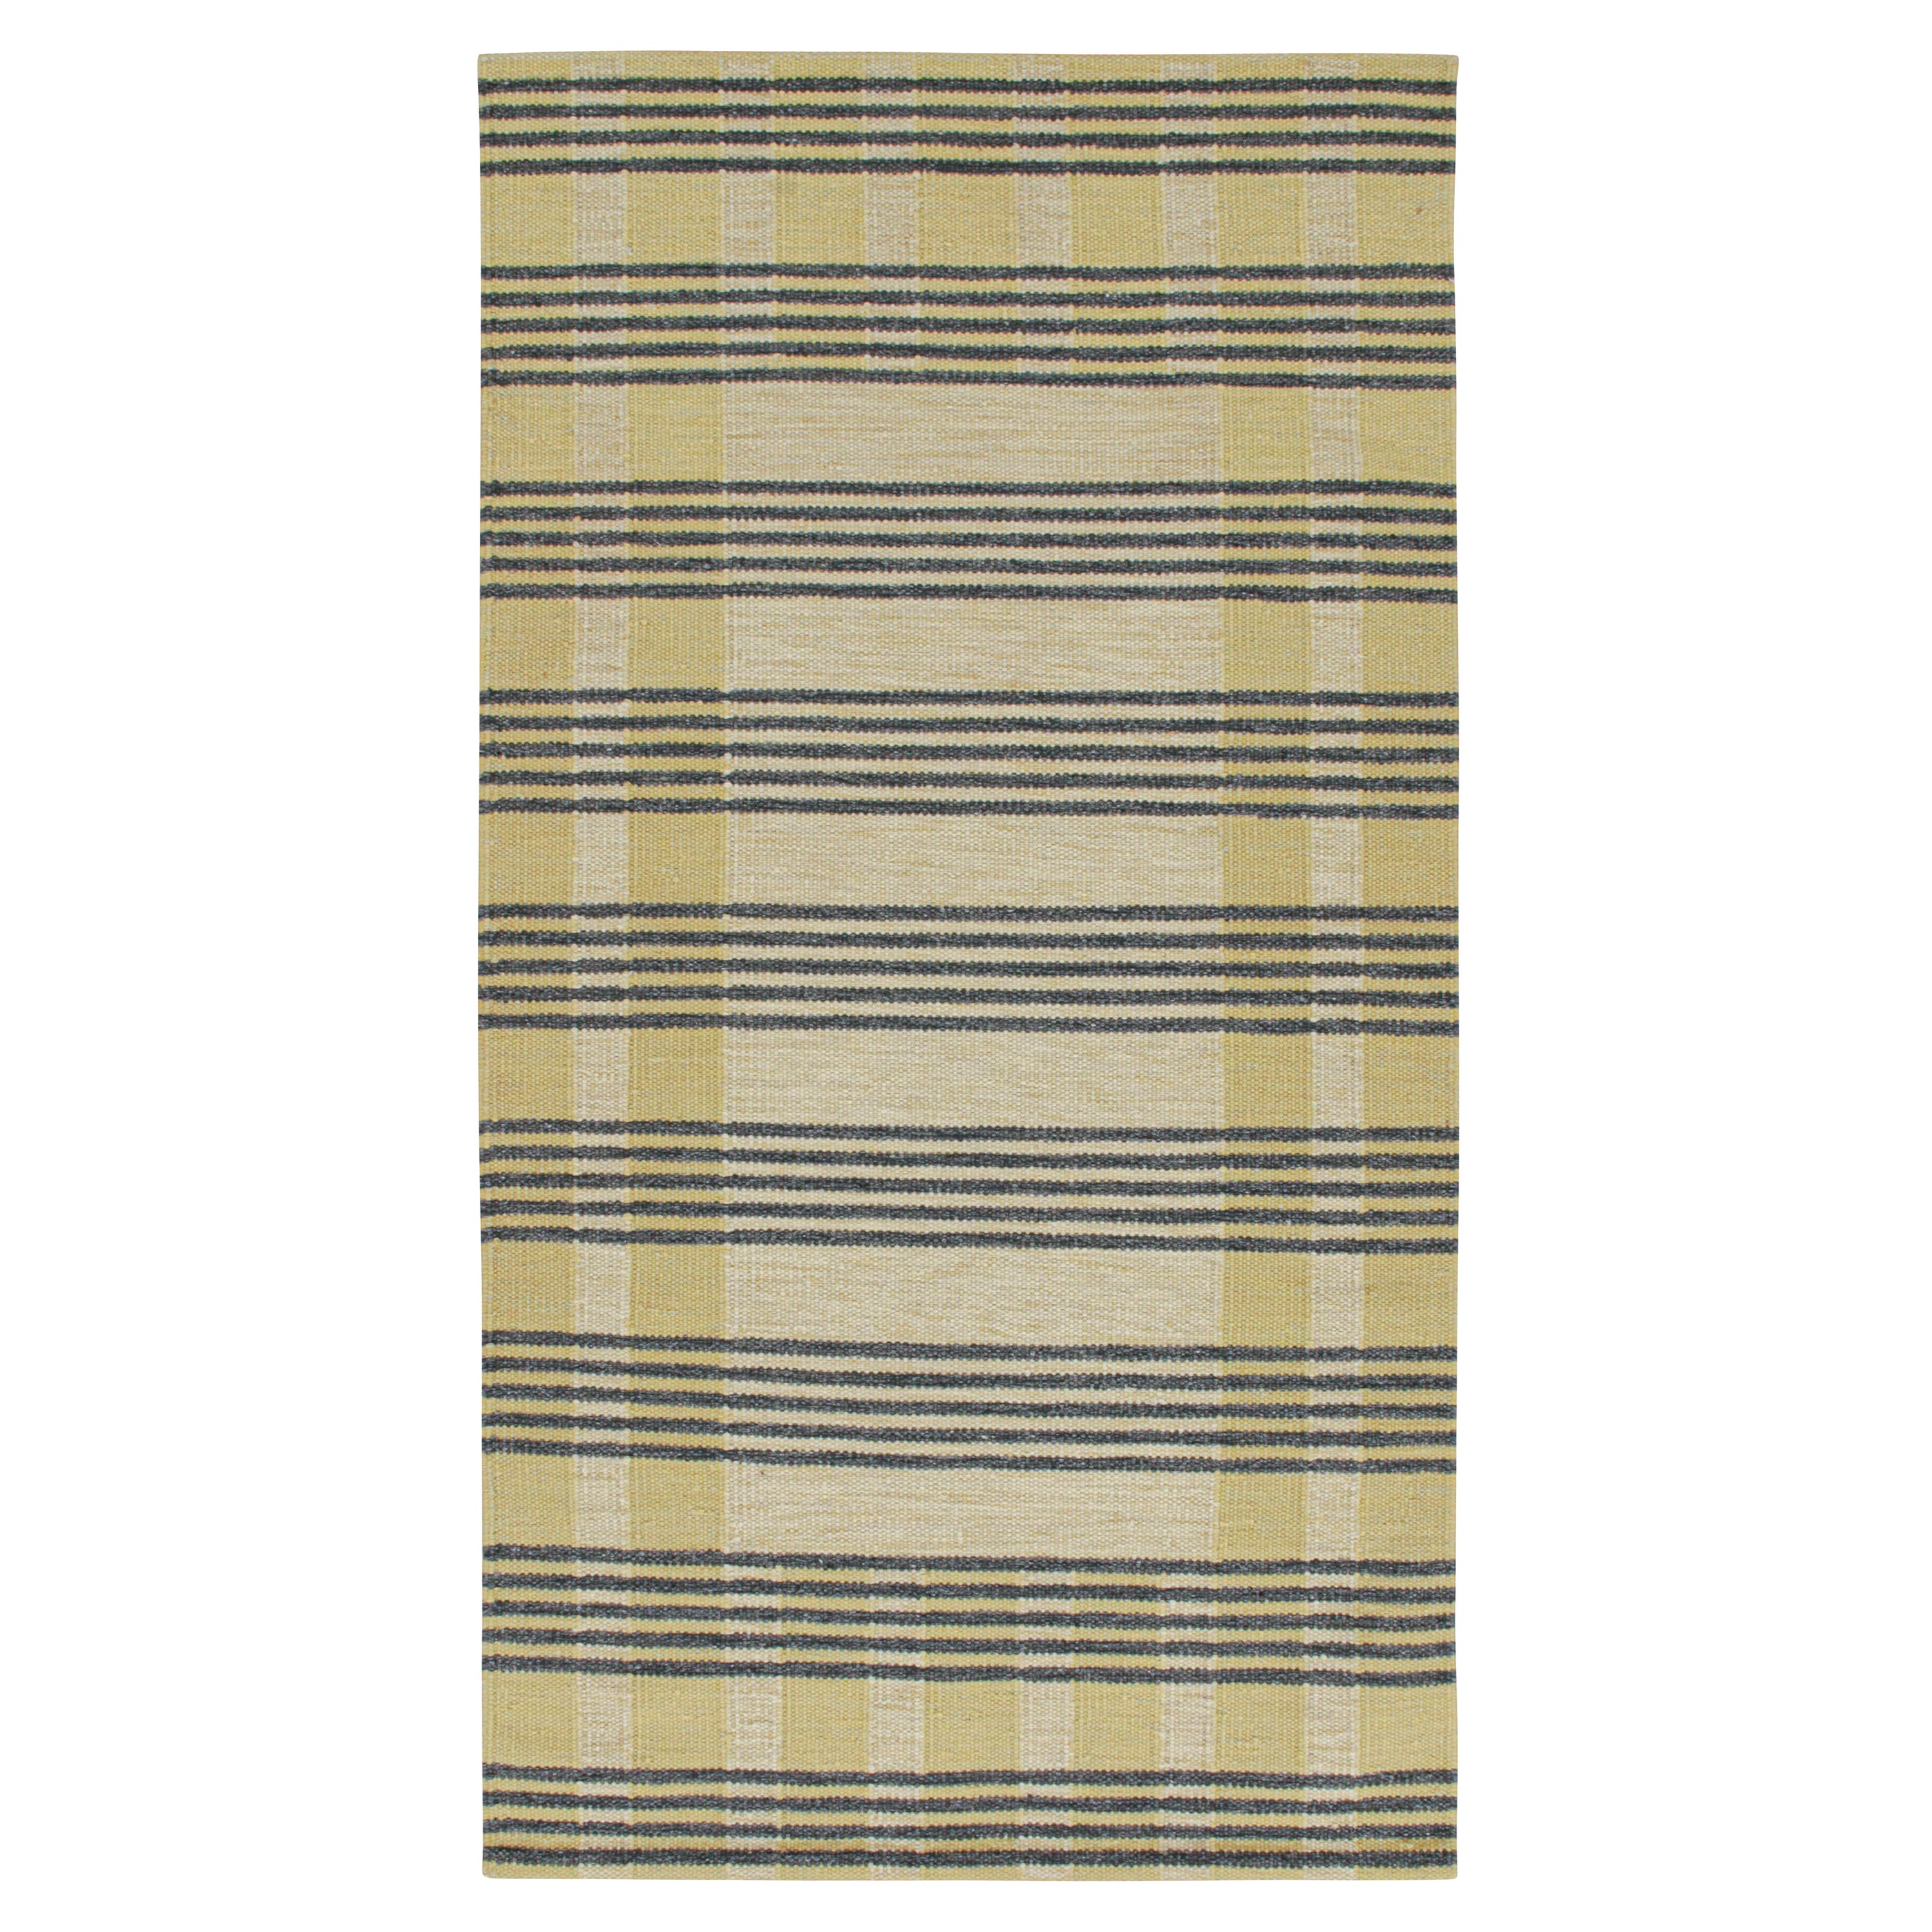 Rug & Kilim’s Scandinavian Style Kilim in Cream with Gray Stripes Patterns For Sale